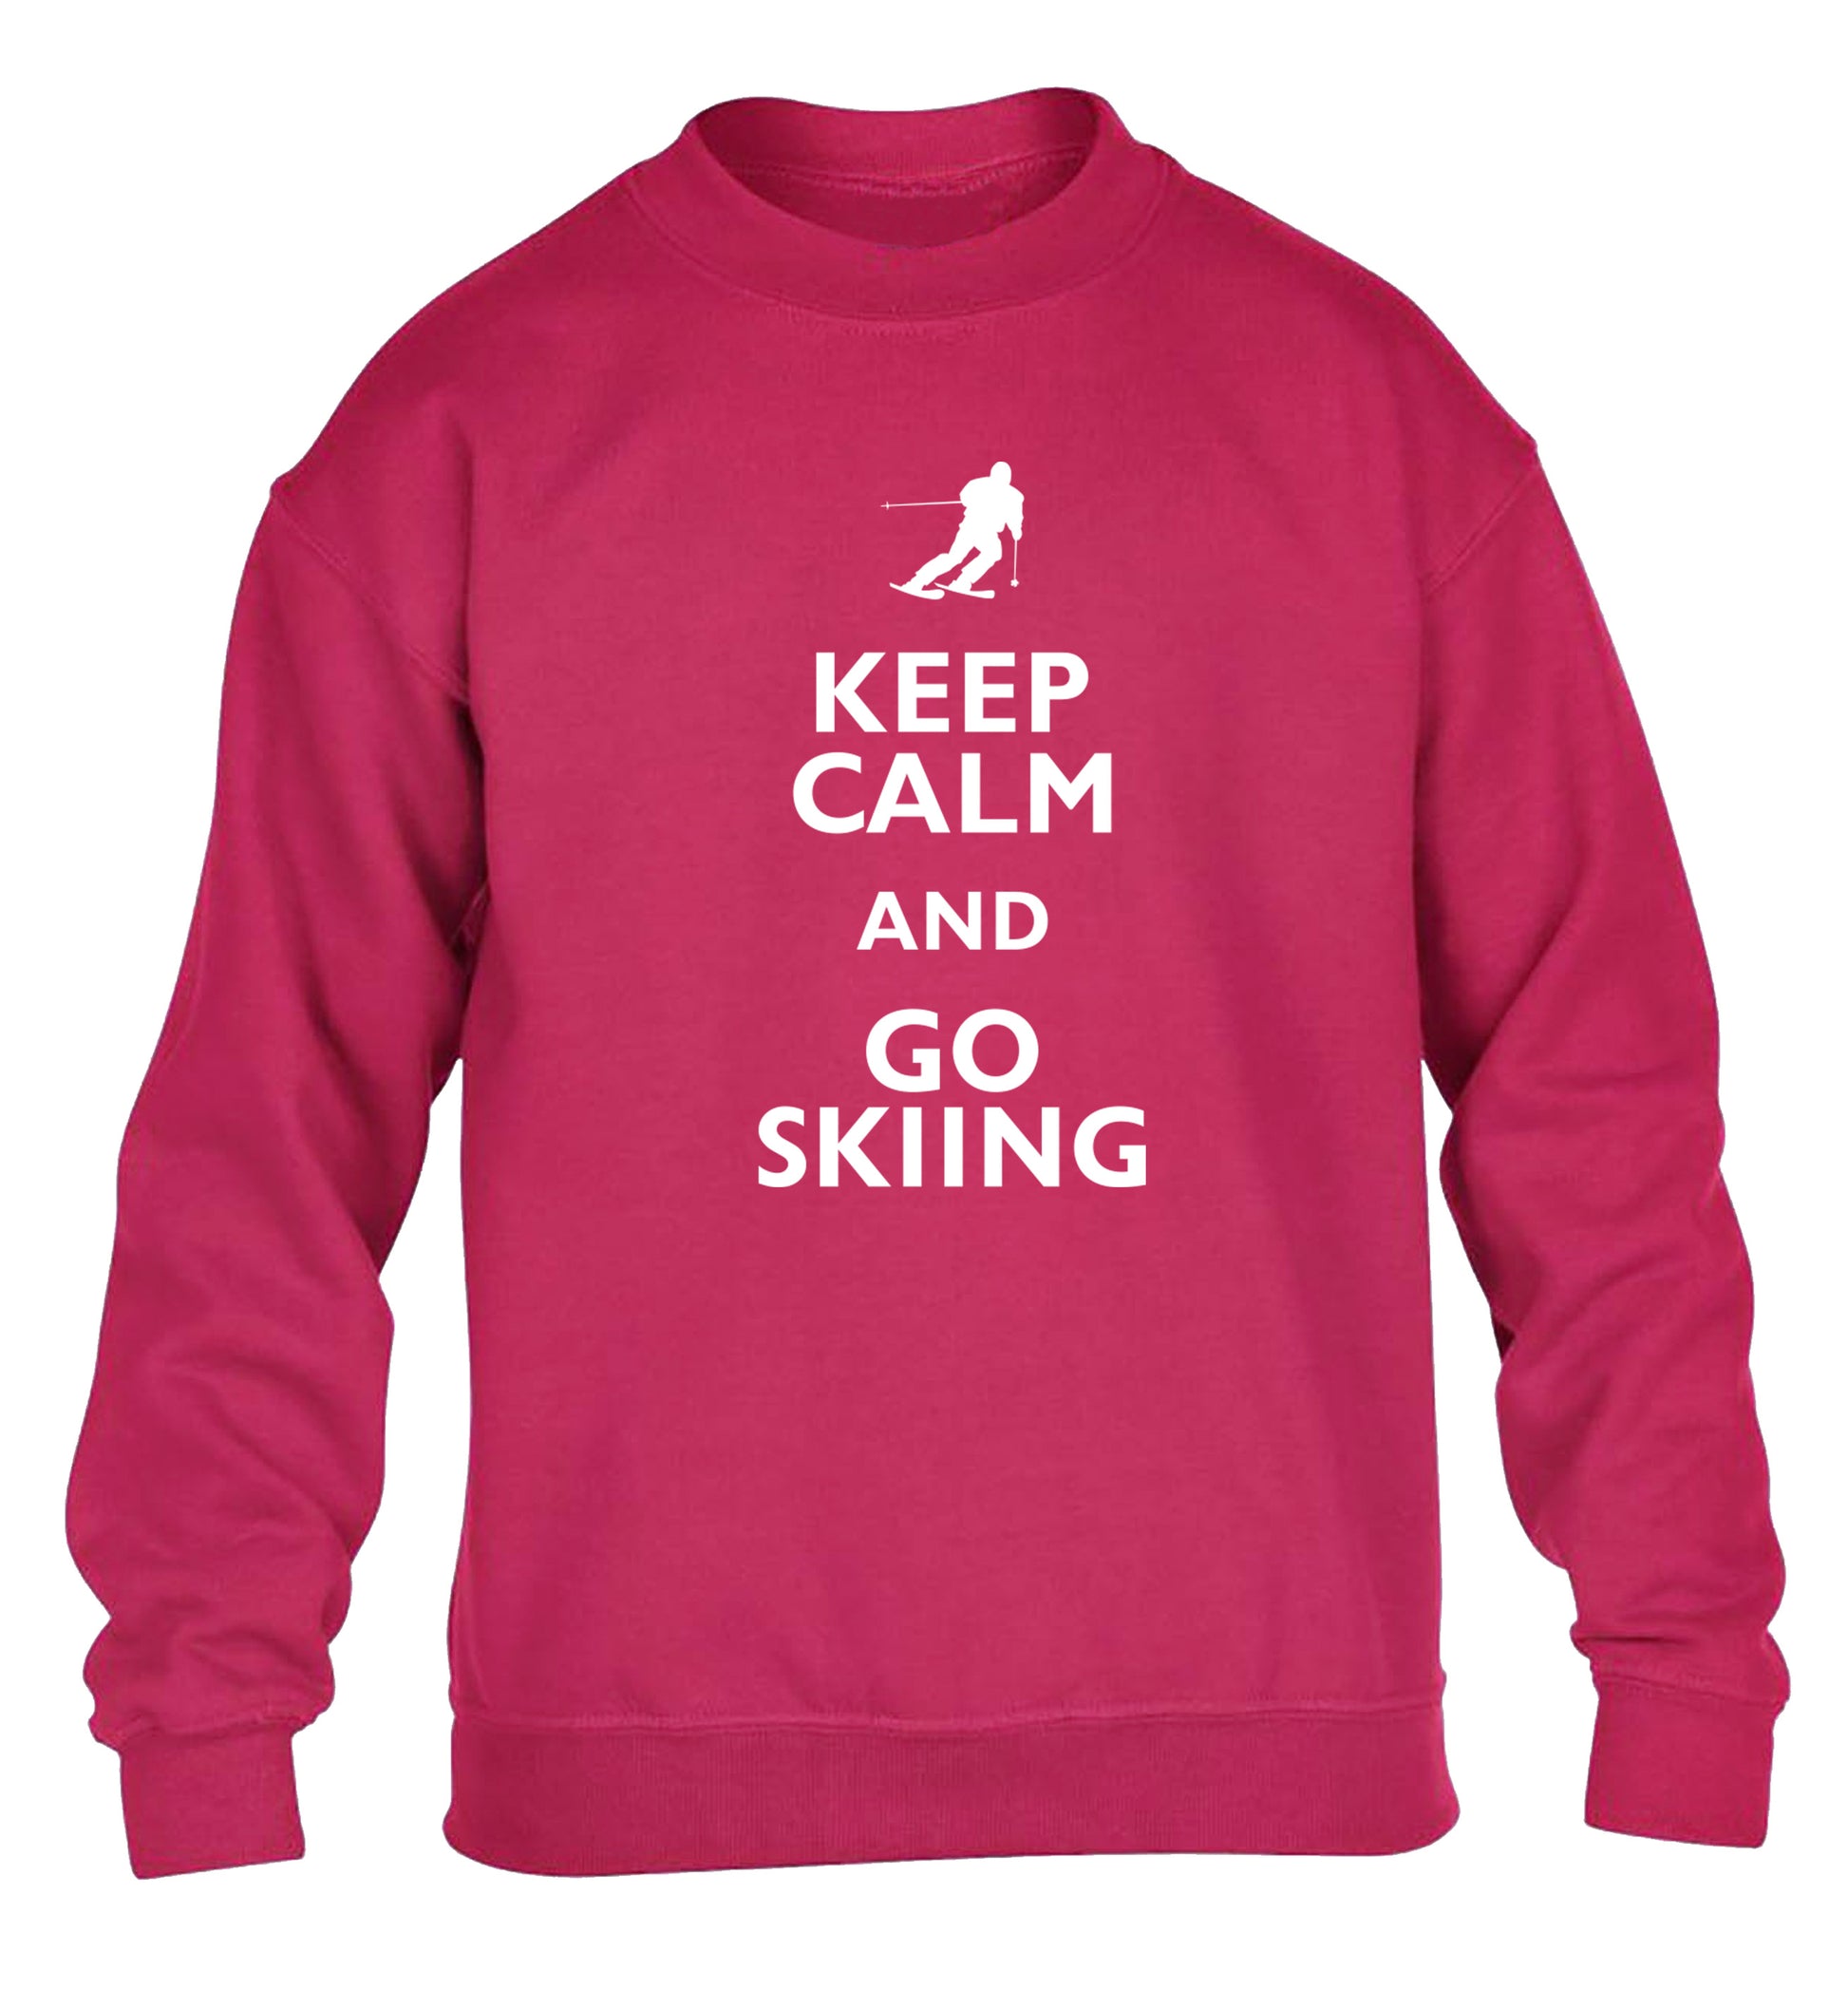 Keep calm and go skiing children's pink sweater 12-14 Years